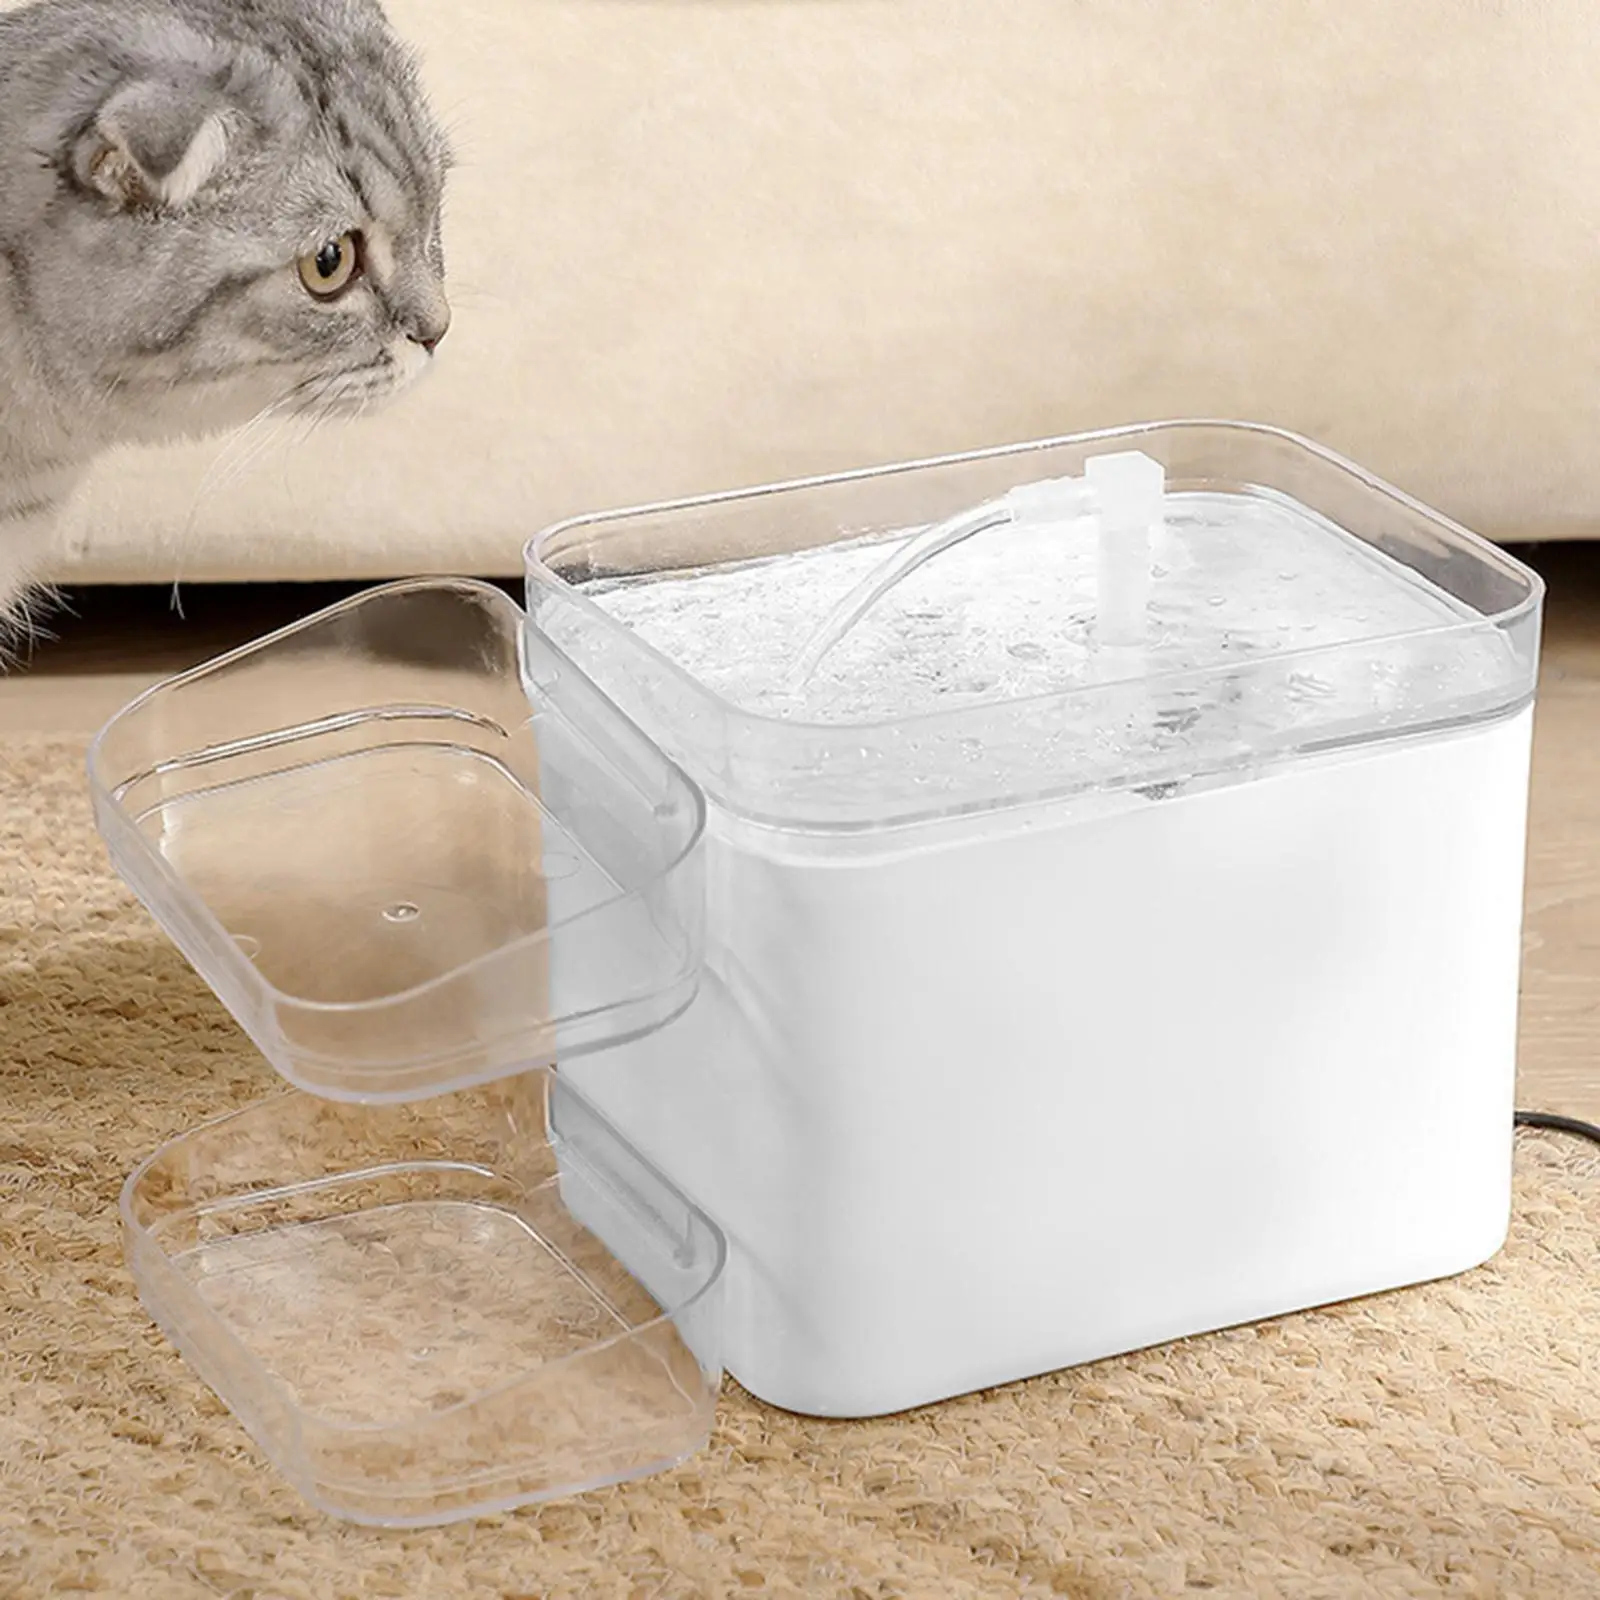 Automatic Cat Water Fountain with Night Light Electric Pet Waterer for Cats